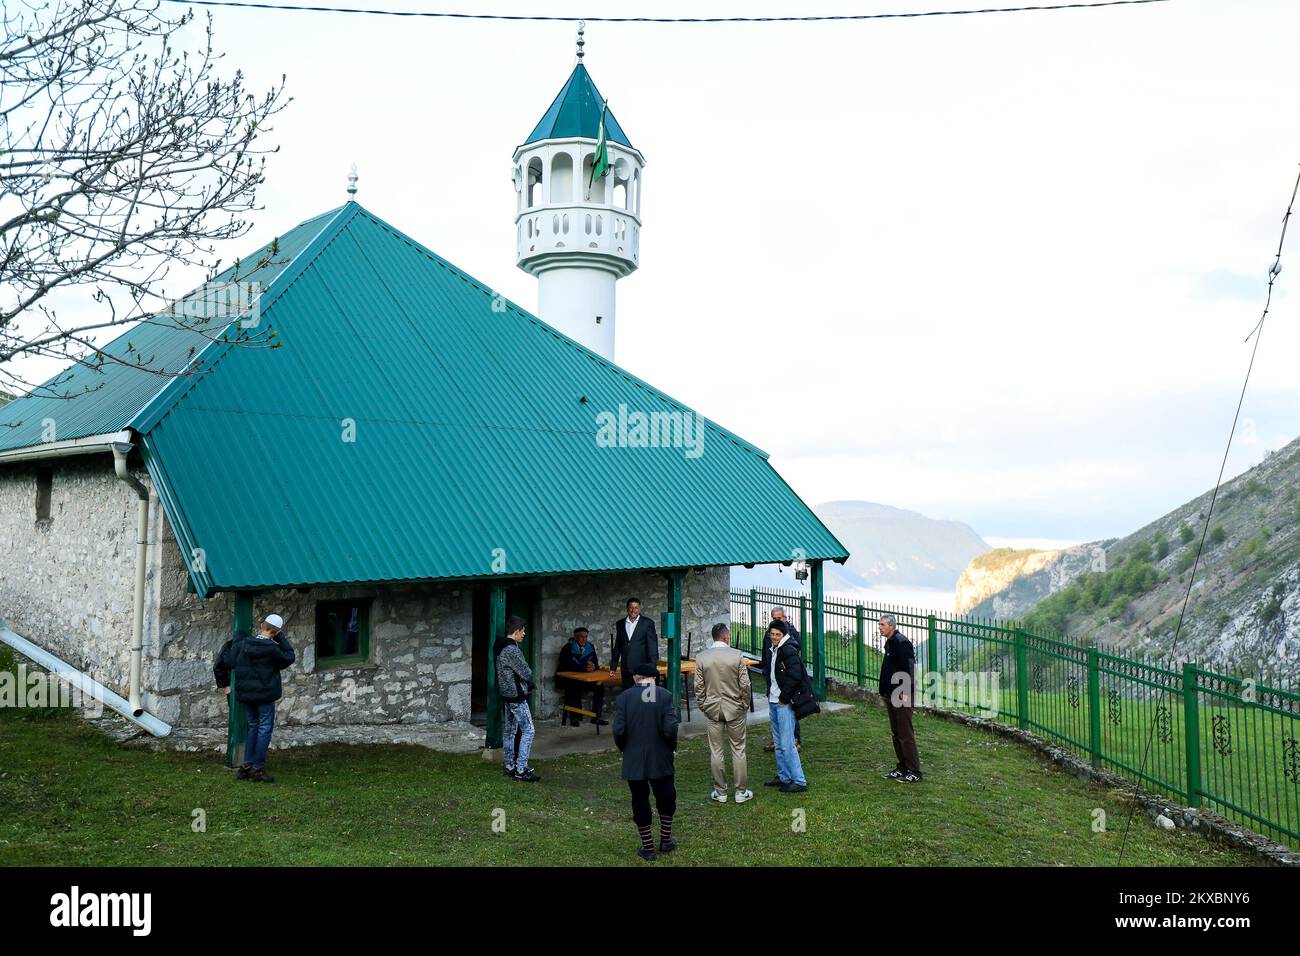 04.06.2019., Lukomir, Bosna i Hercegovina - In the highest bosnian village of Lukomir, the Muslims welcomed the Ramadan Bayram holiday. After a long winter, the residents of Lukomir returned to their village to welcome the biggest Muslim holiday. The village consists of about 50 houses where are living about 20 families. The mosque in the village was built in 1969. This village, located on the slopes of Mount Bjelasnica, about 50 kilometers from capital Sarajevo. Photo: Armin Durgut/PIXSELL Stock Photo